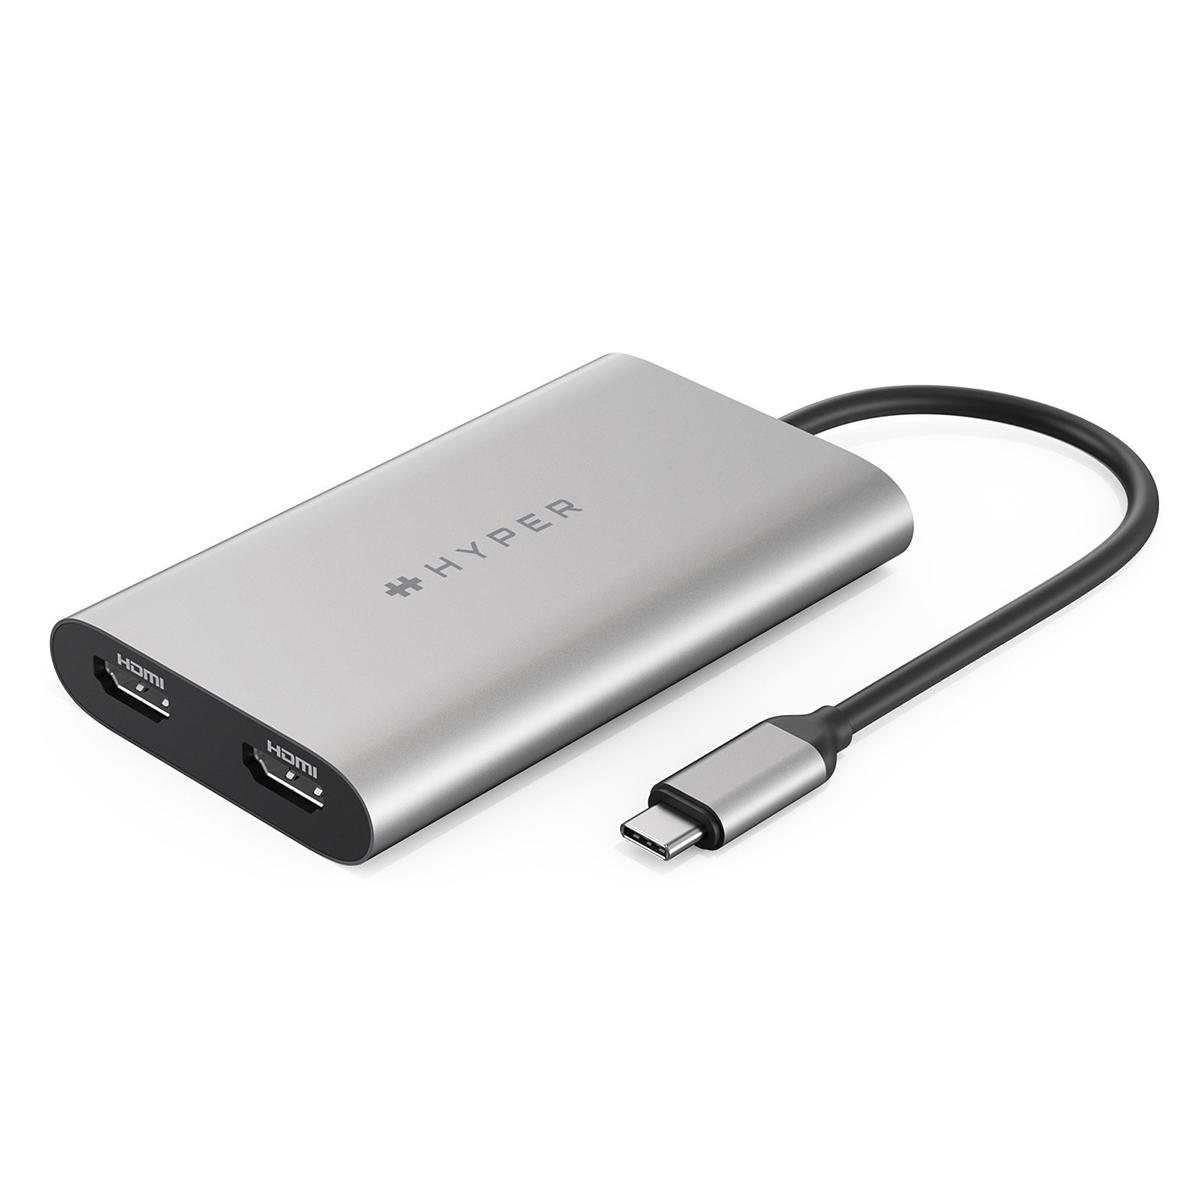 hyperdrive dual 4k hdmi adapter for m1 macbook